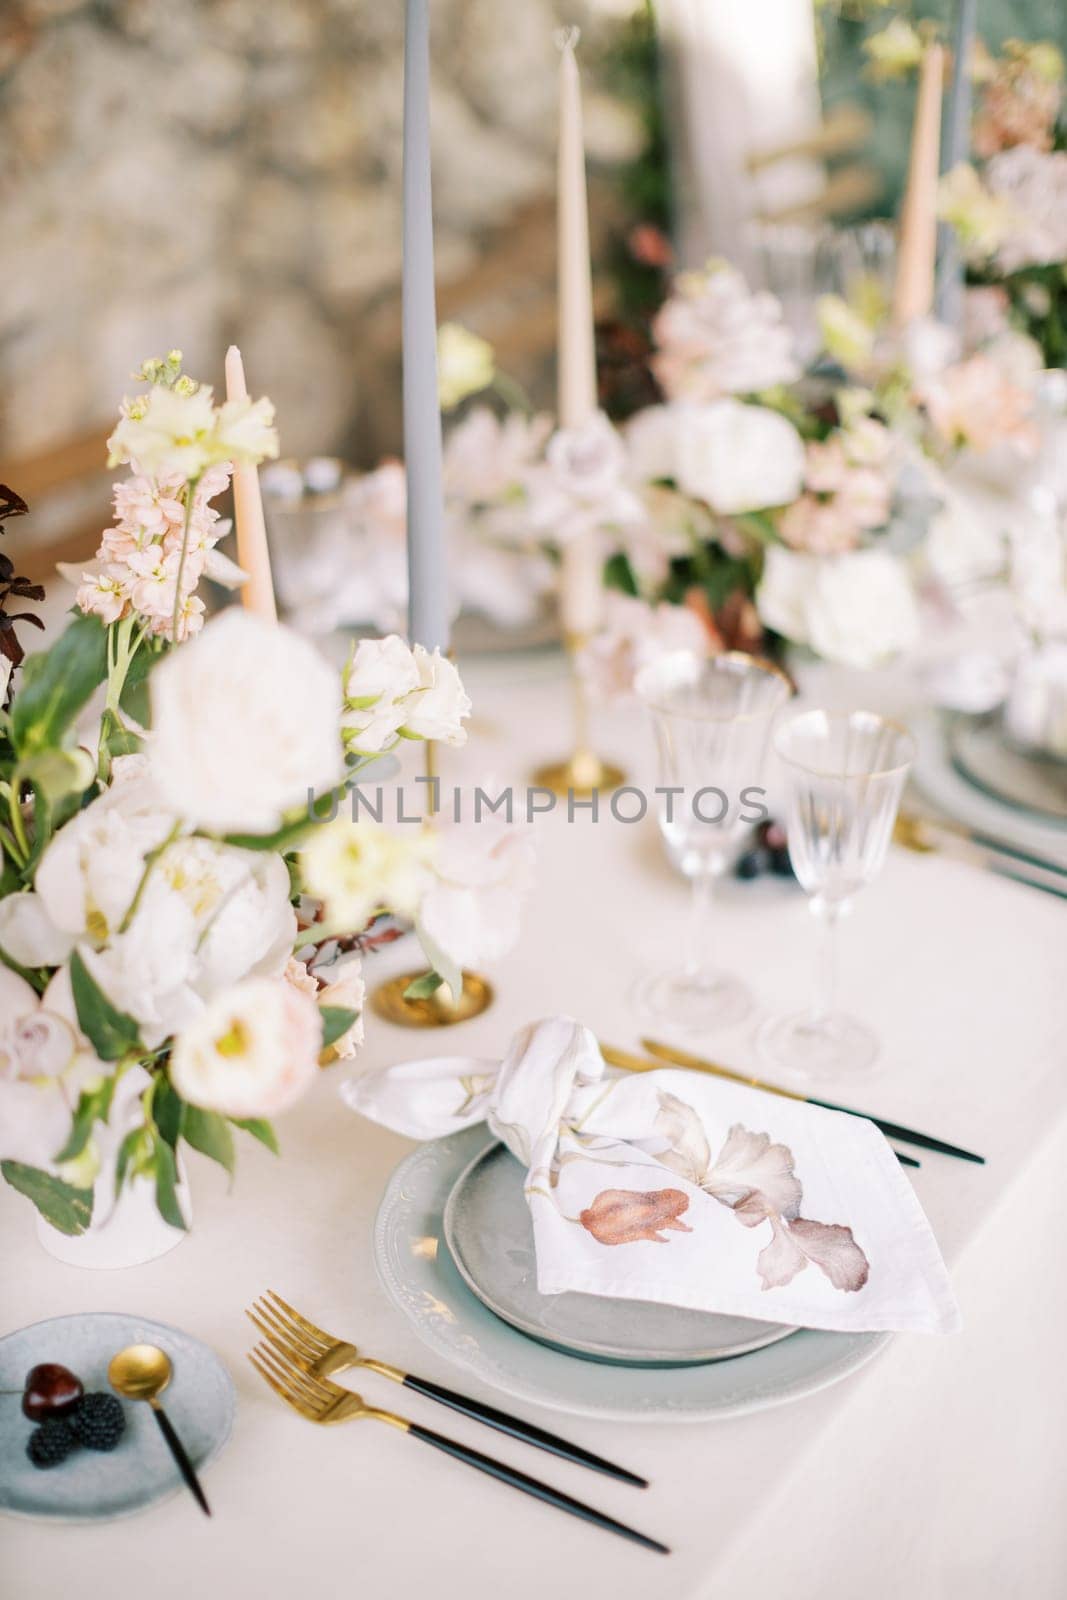 Knotted colorful napkin lies on a plate on the table next to a bouquet of flowers and cutlery. High quality photo